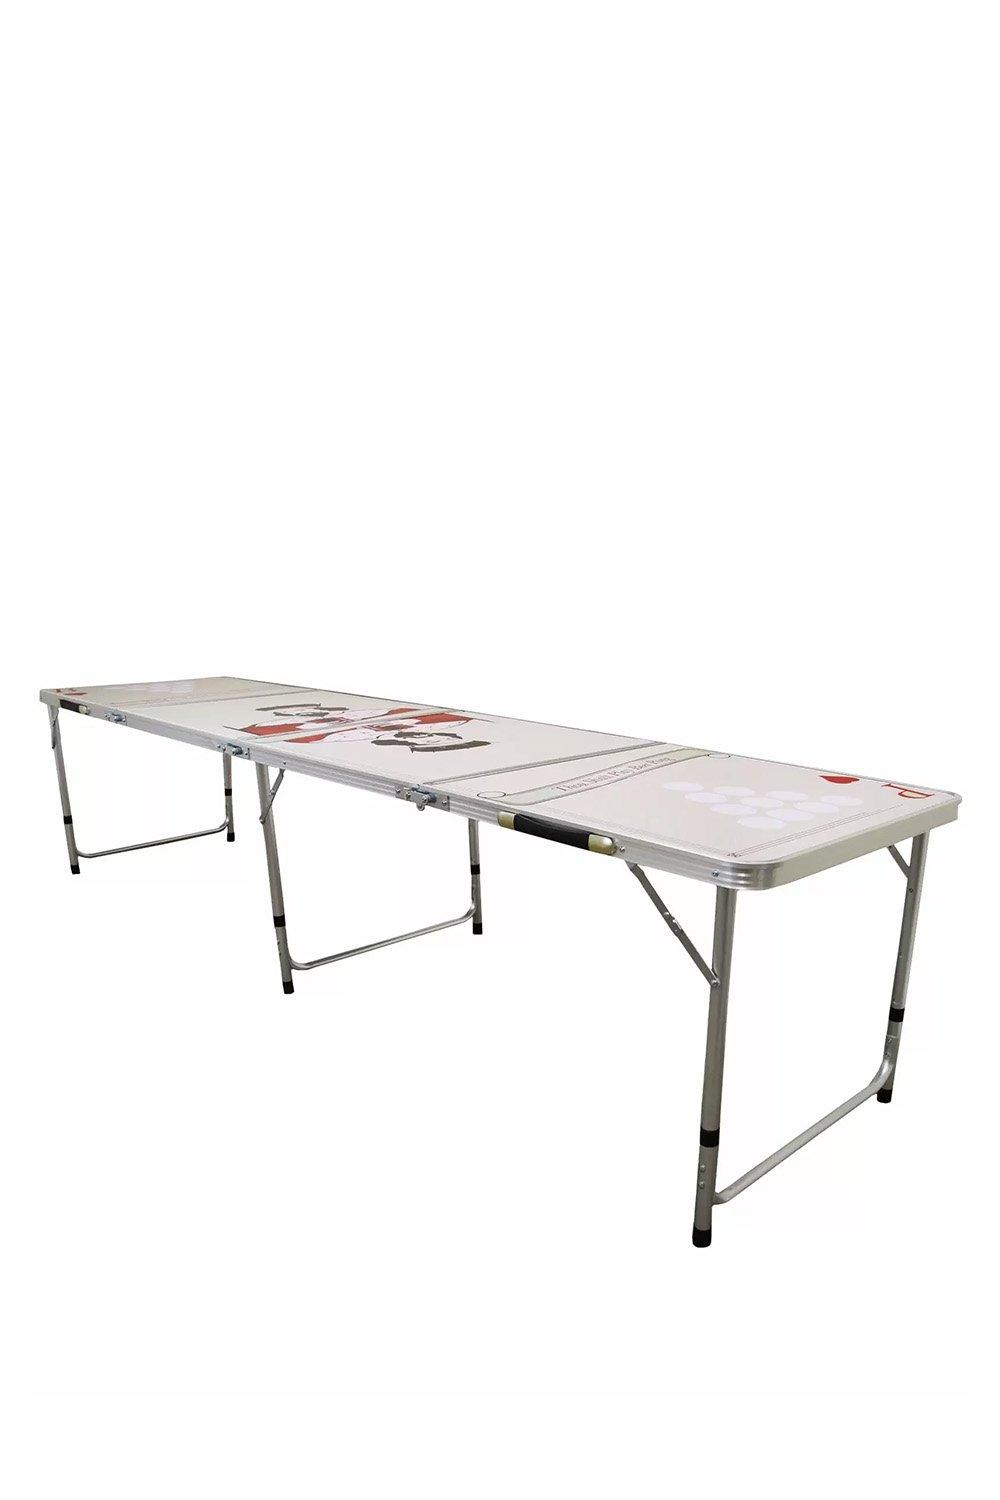 Beer Pong Table 8FT